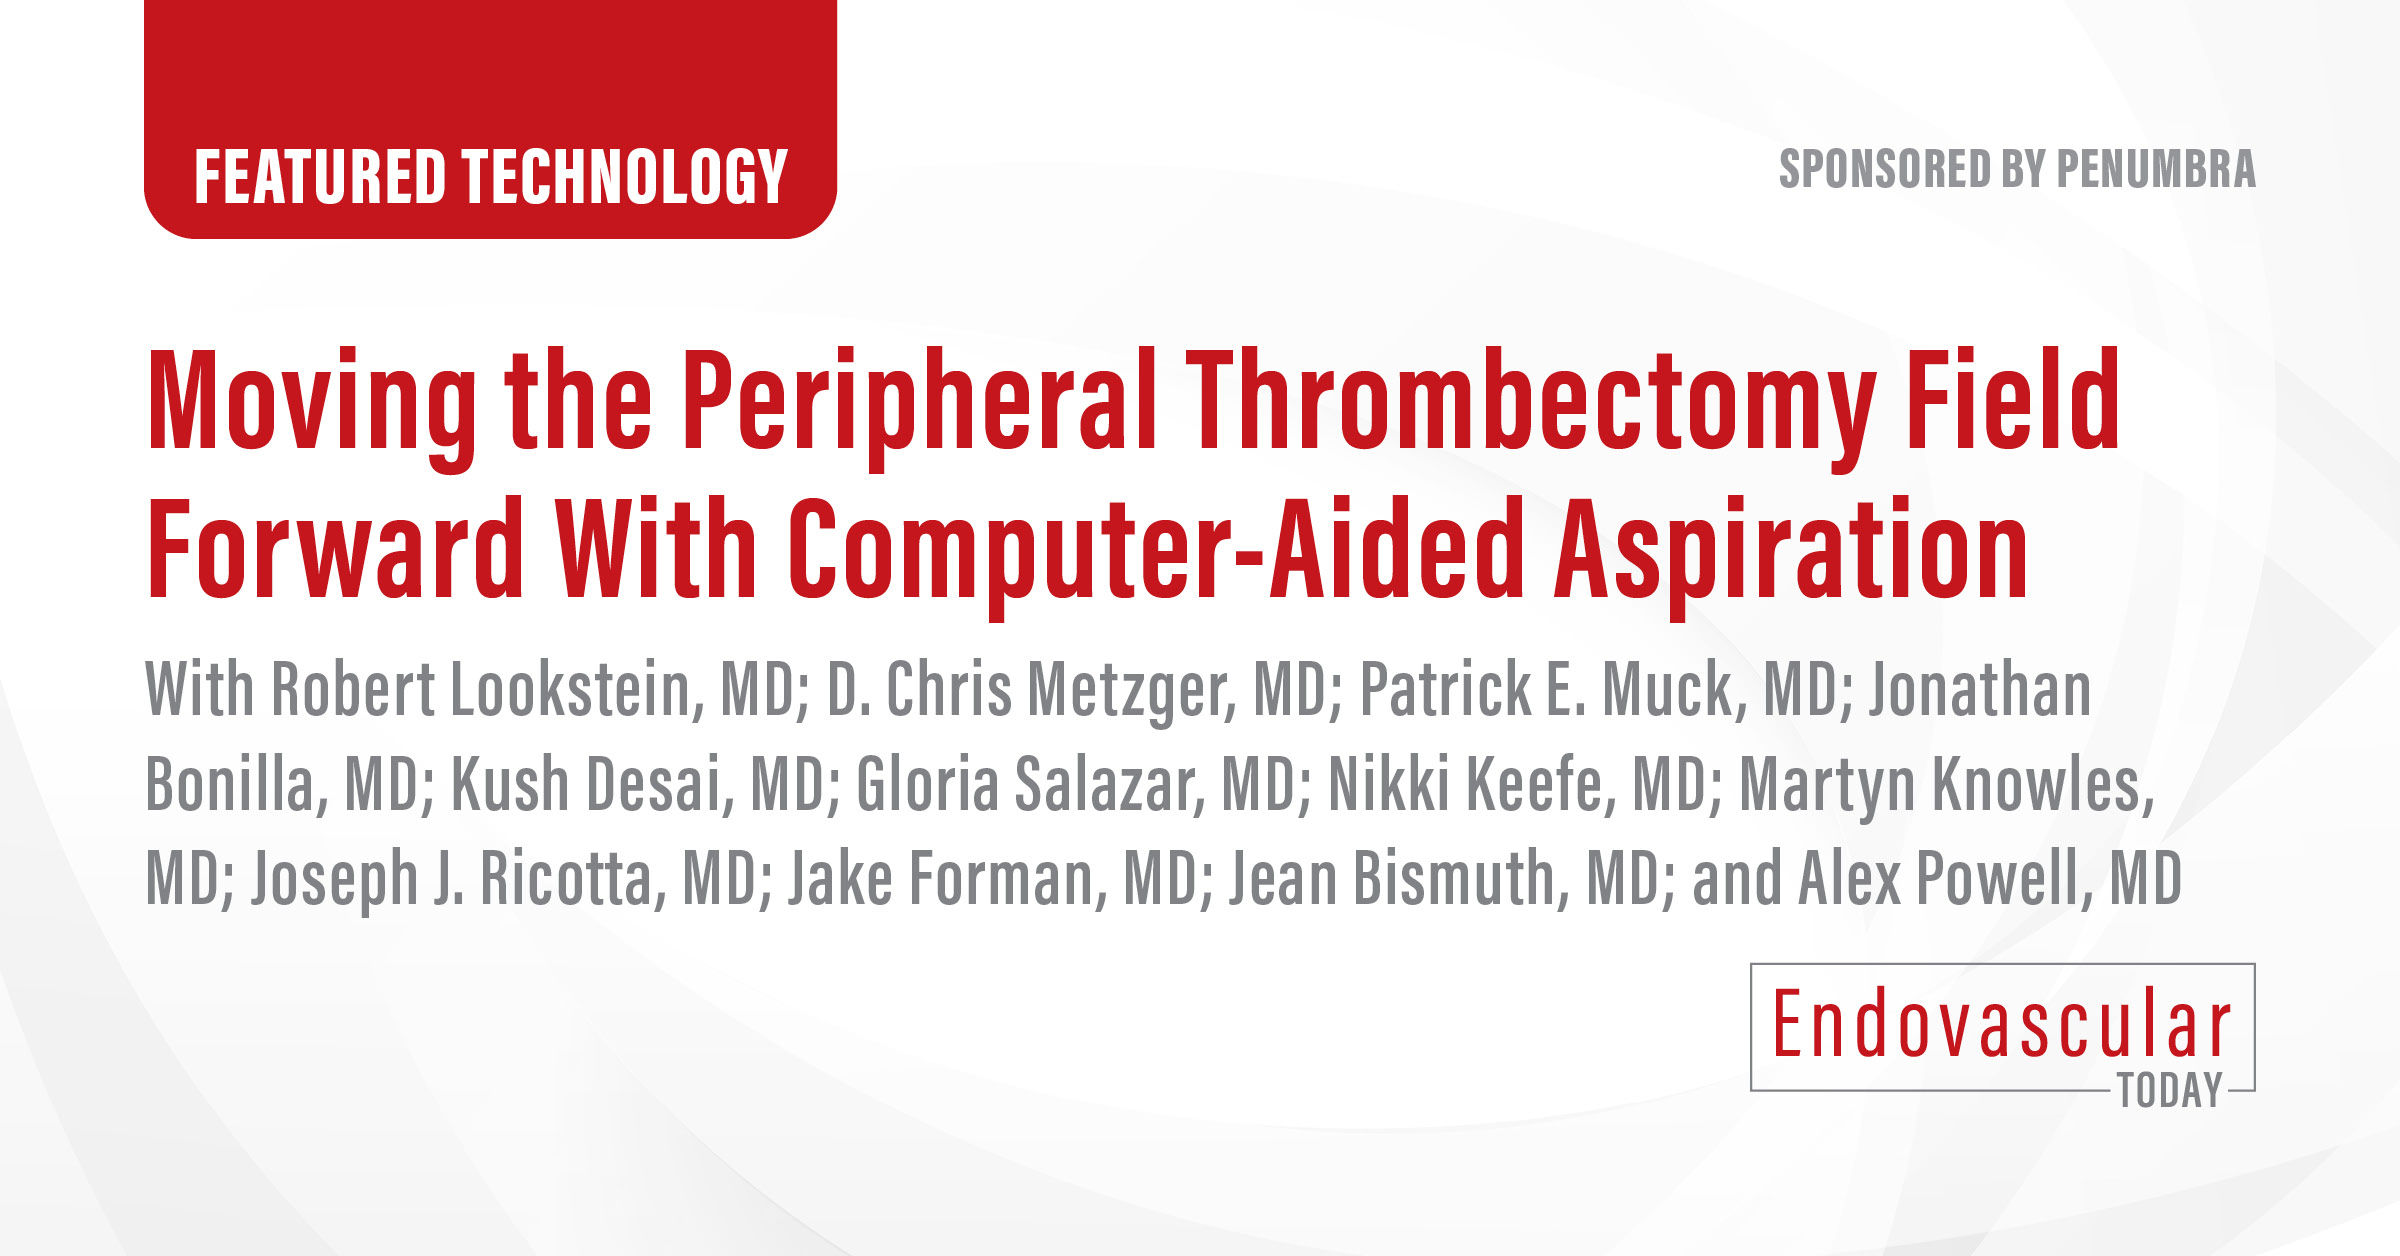 Endovascular – Aspiration Thrombectomy - Delta Surgical